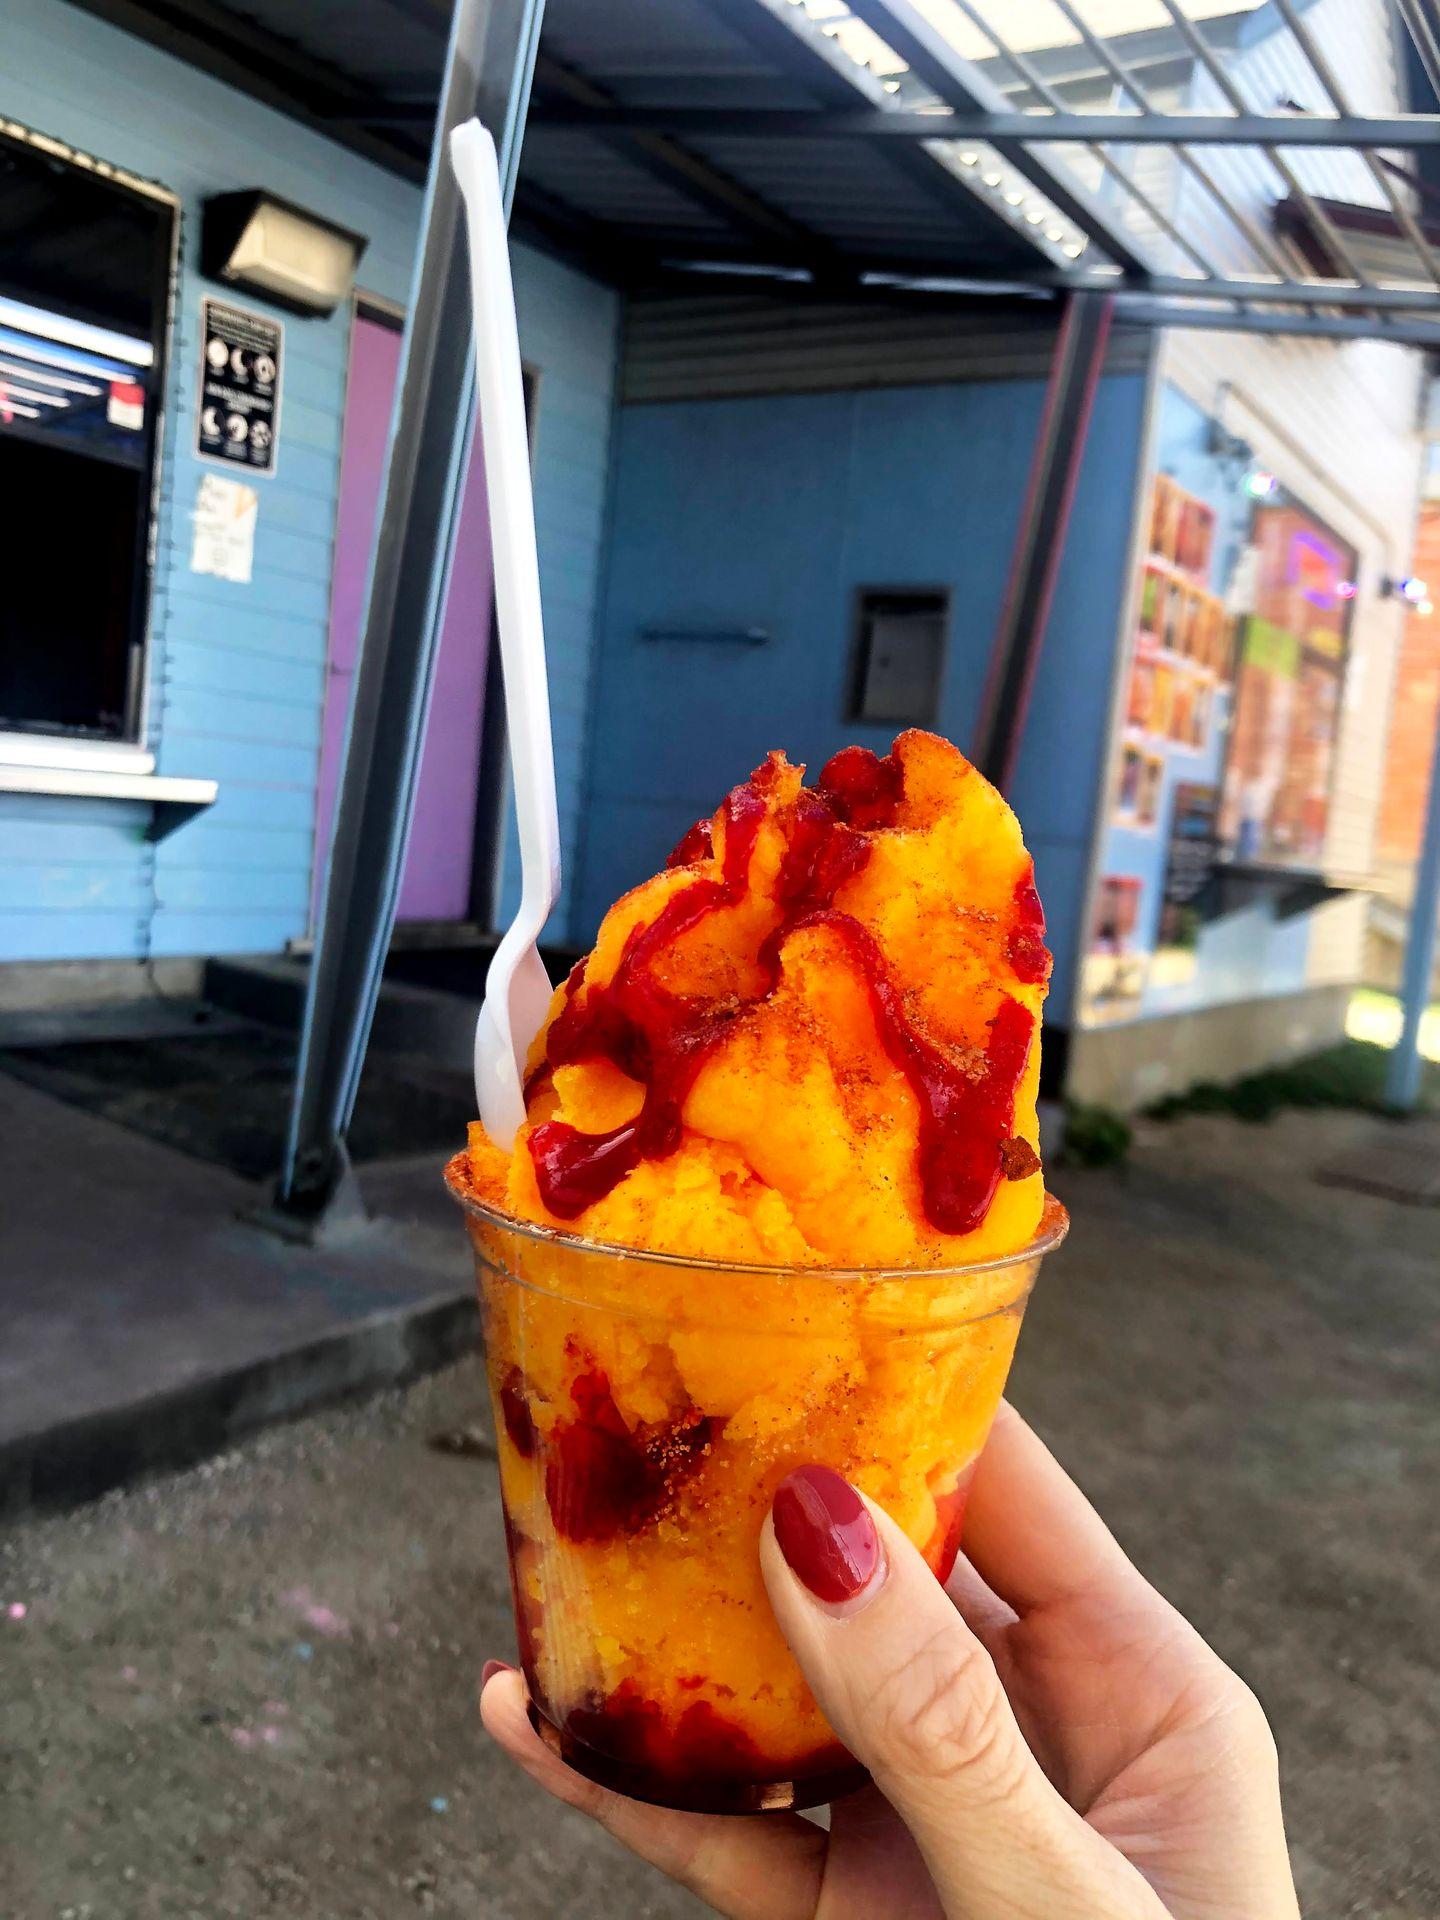 Holding up a chamoyada. There is mango shaved ice topped with red chamoy sauce.